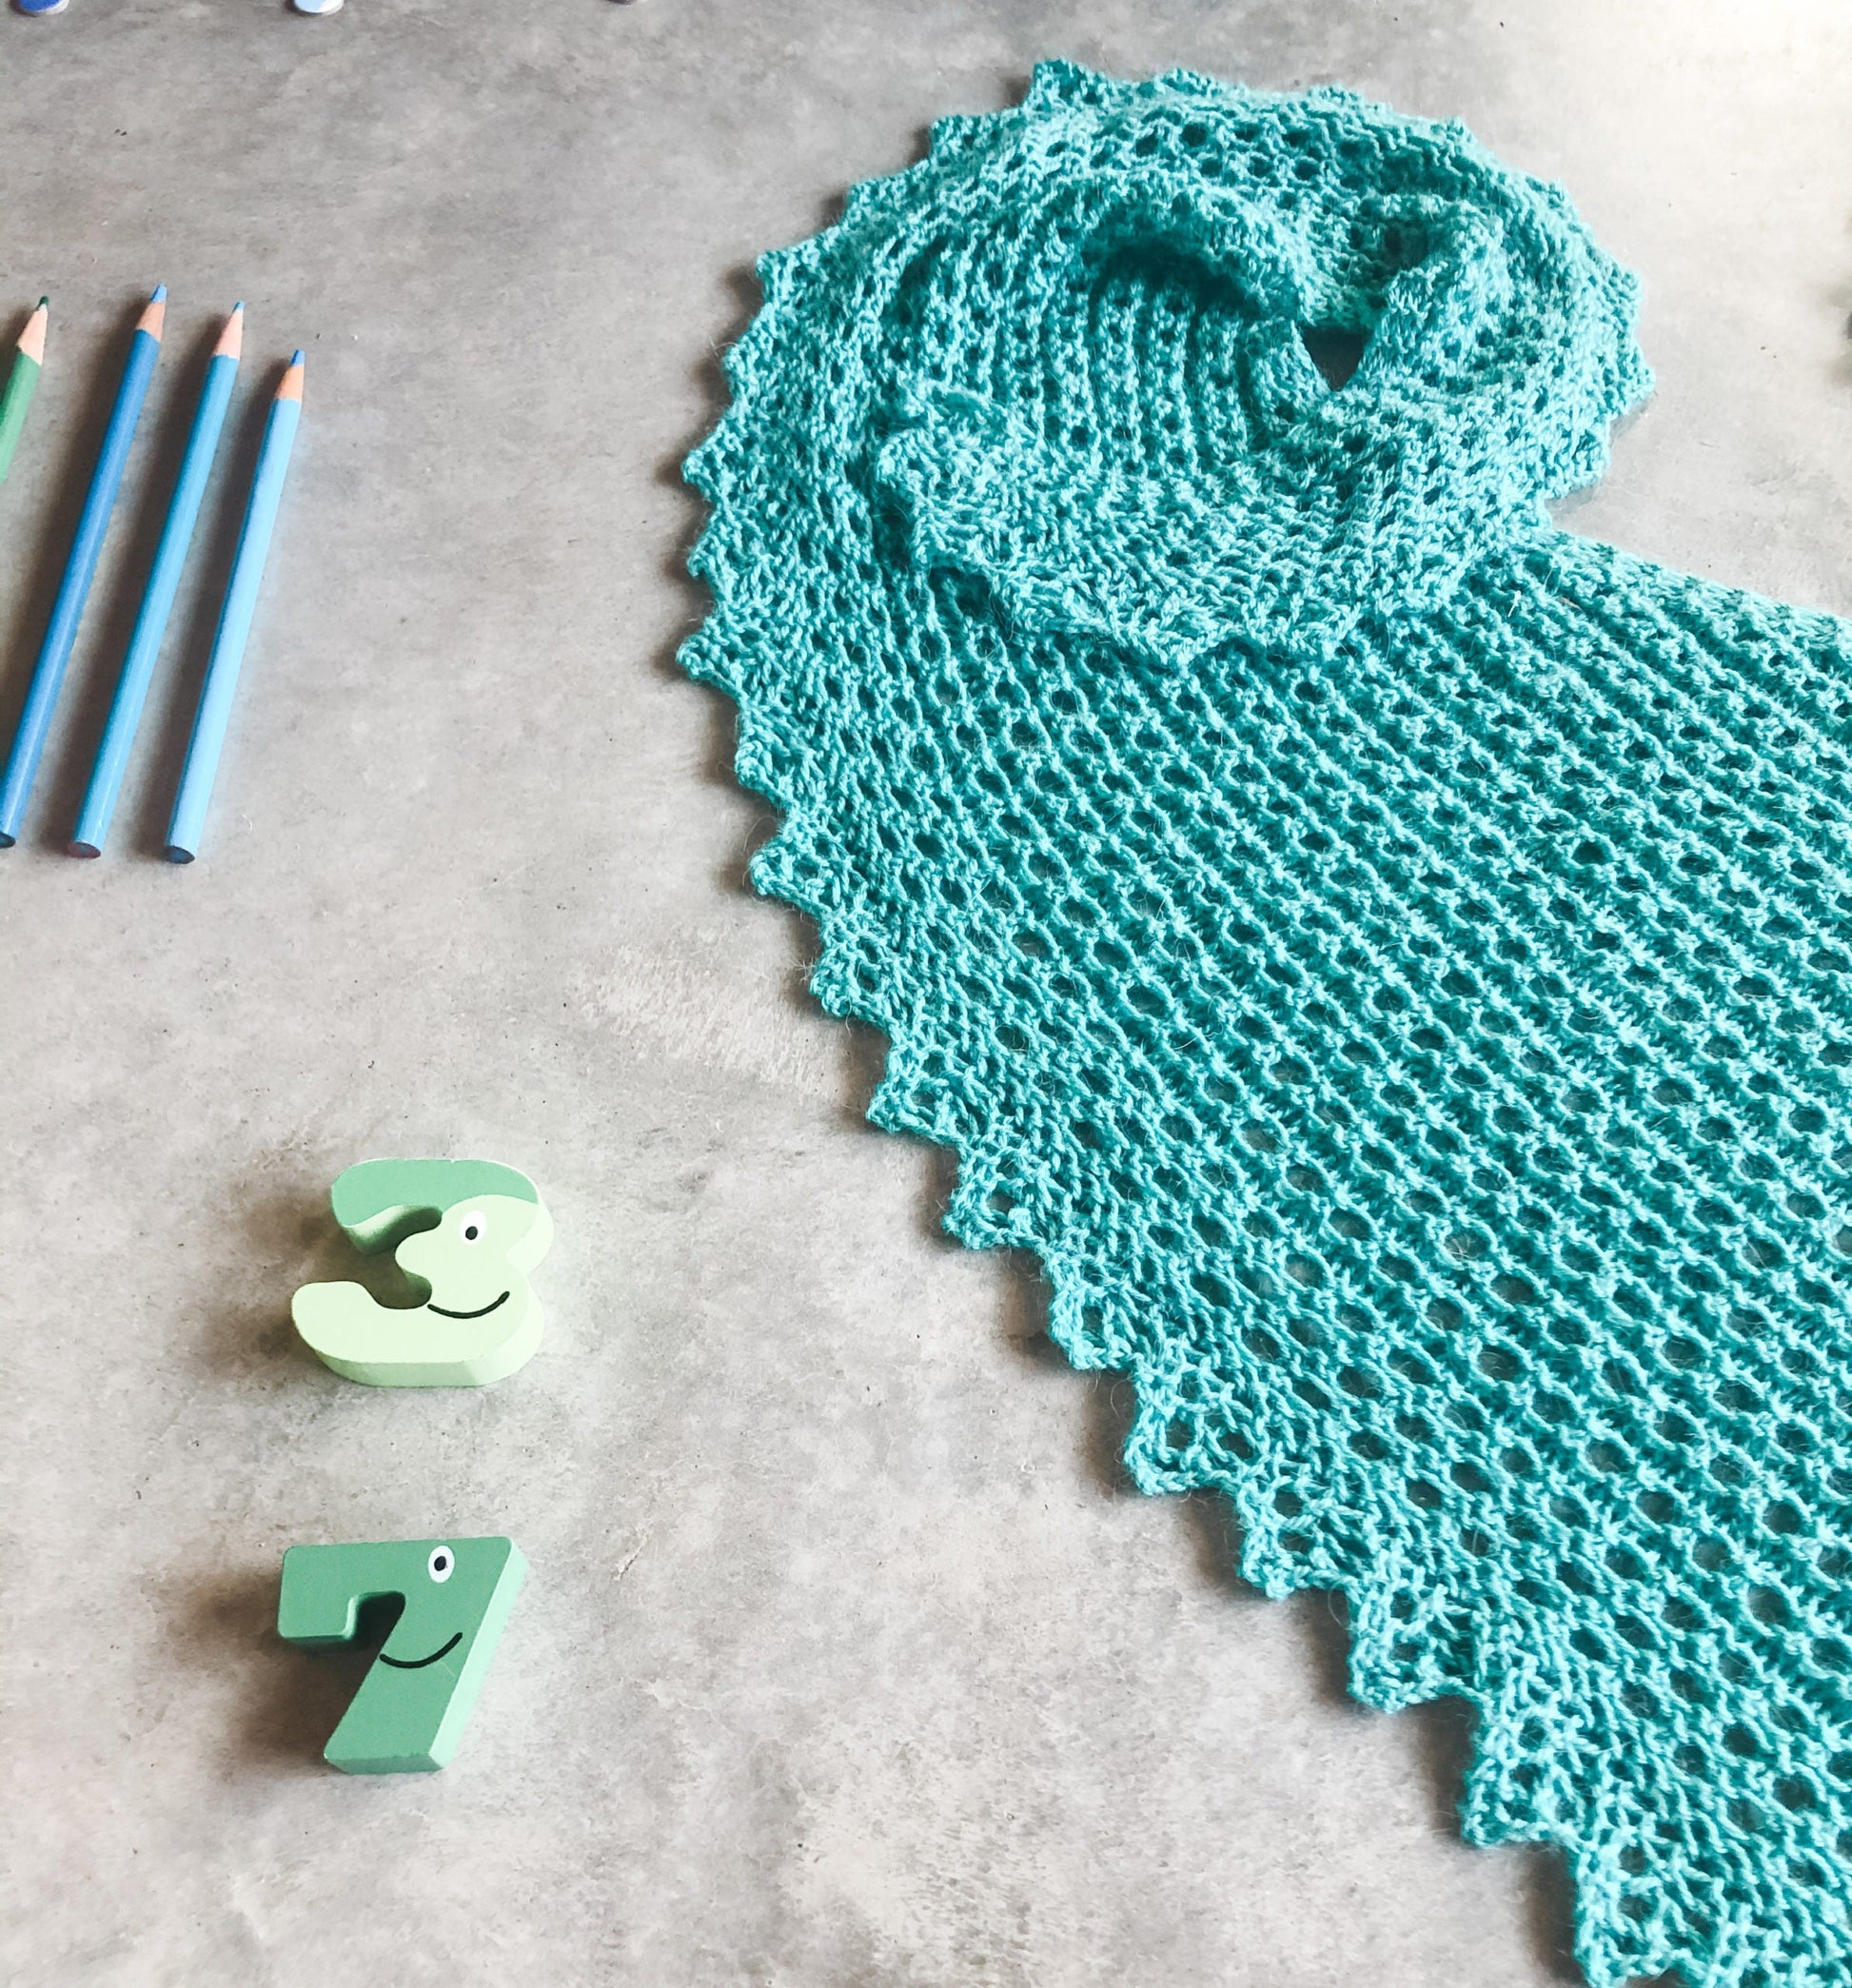 Kelbourne Woolens Kits Year of Gifts Kit - August Lily of the Valley Shawl